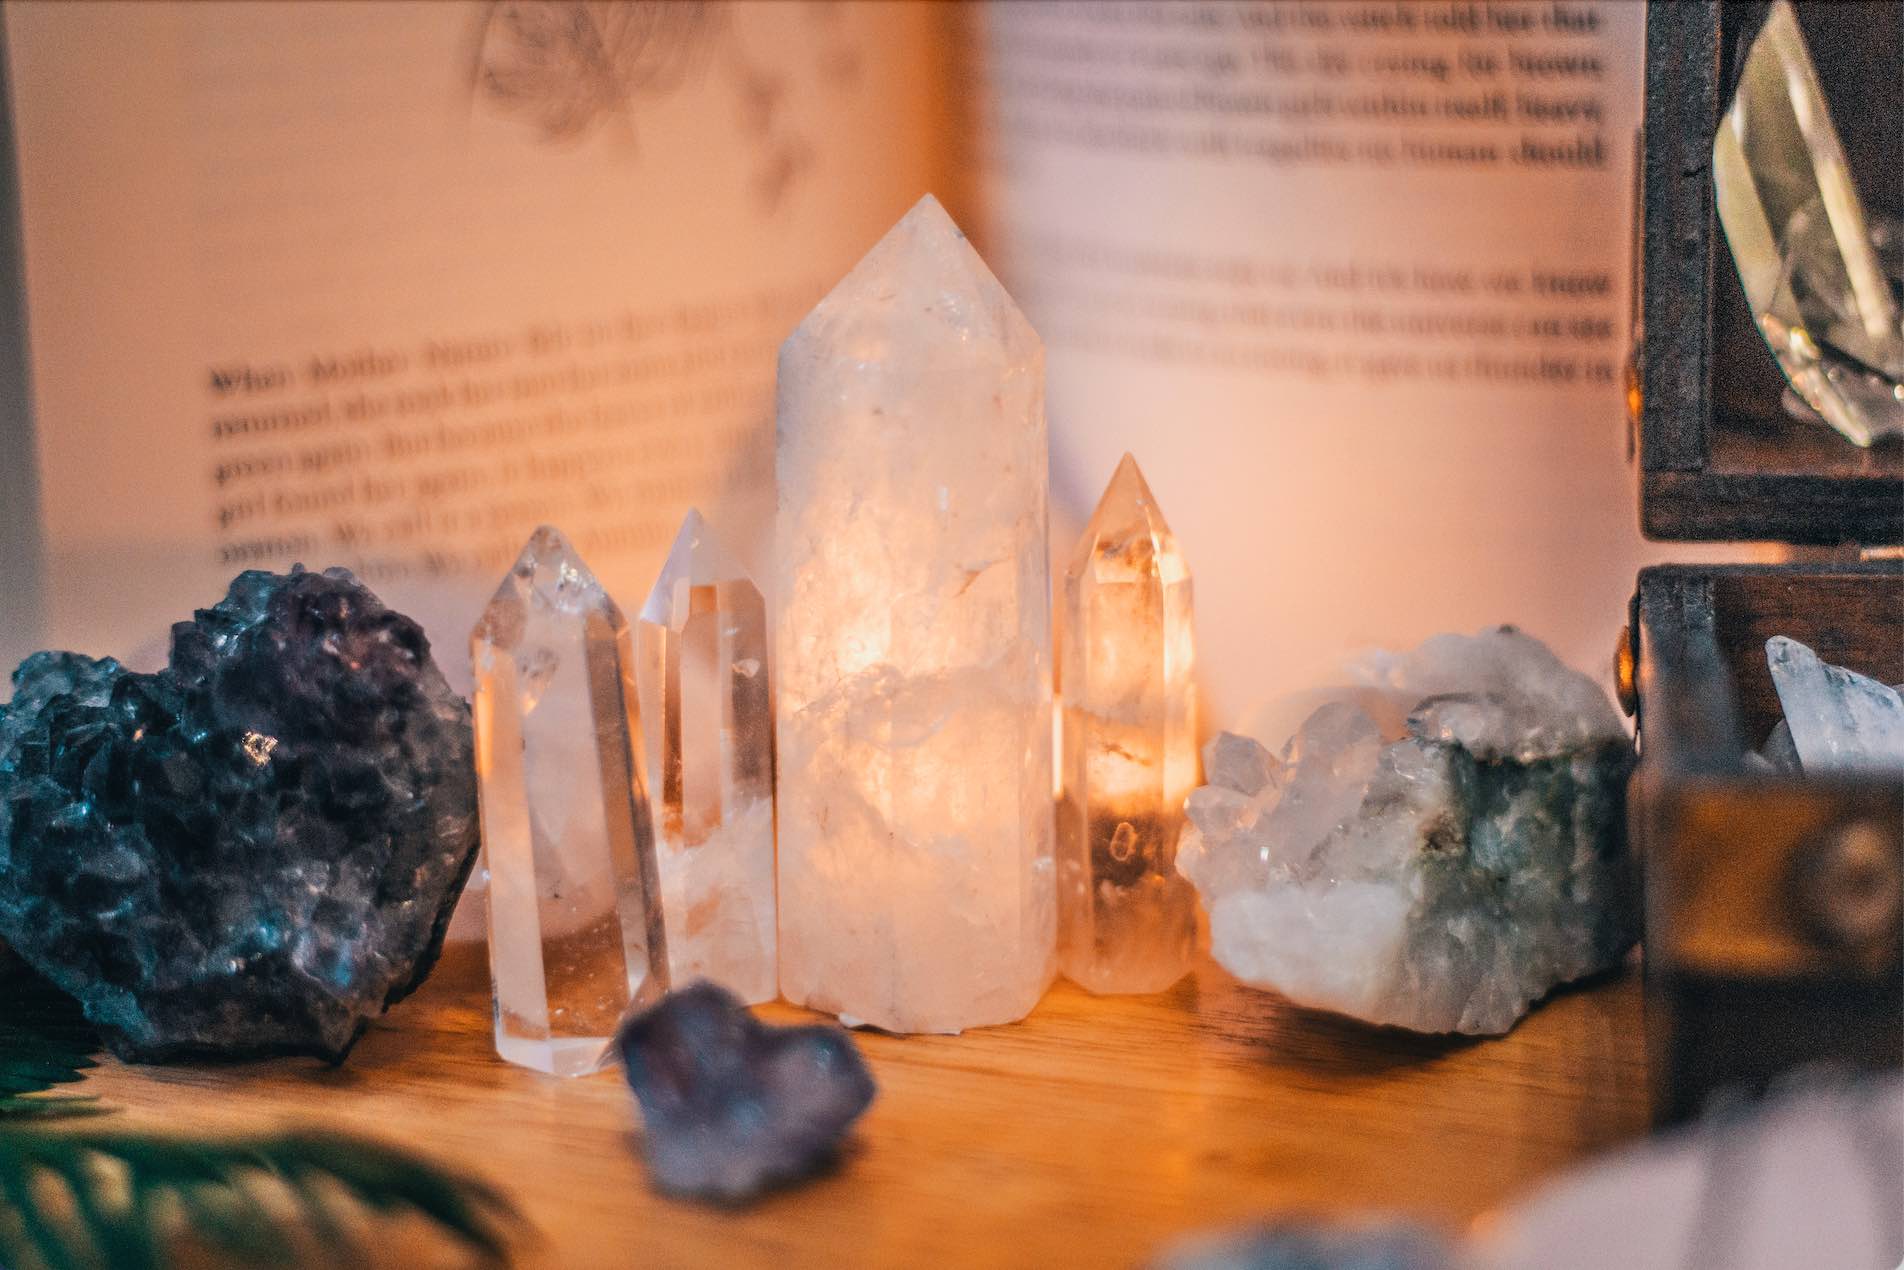 These Curated Crystals Will Help You Bloom Along With the Season